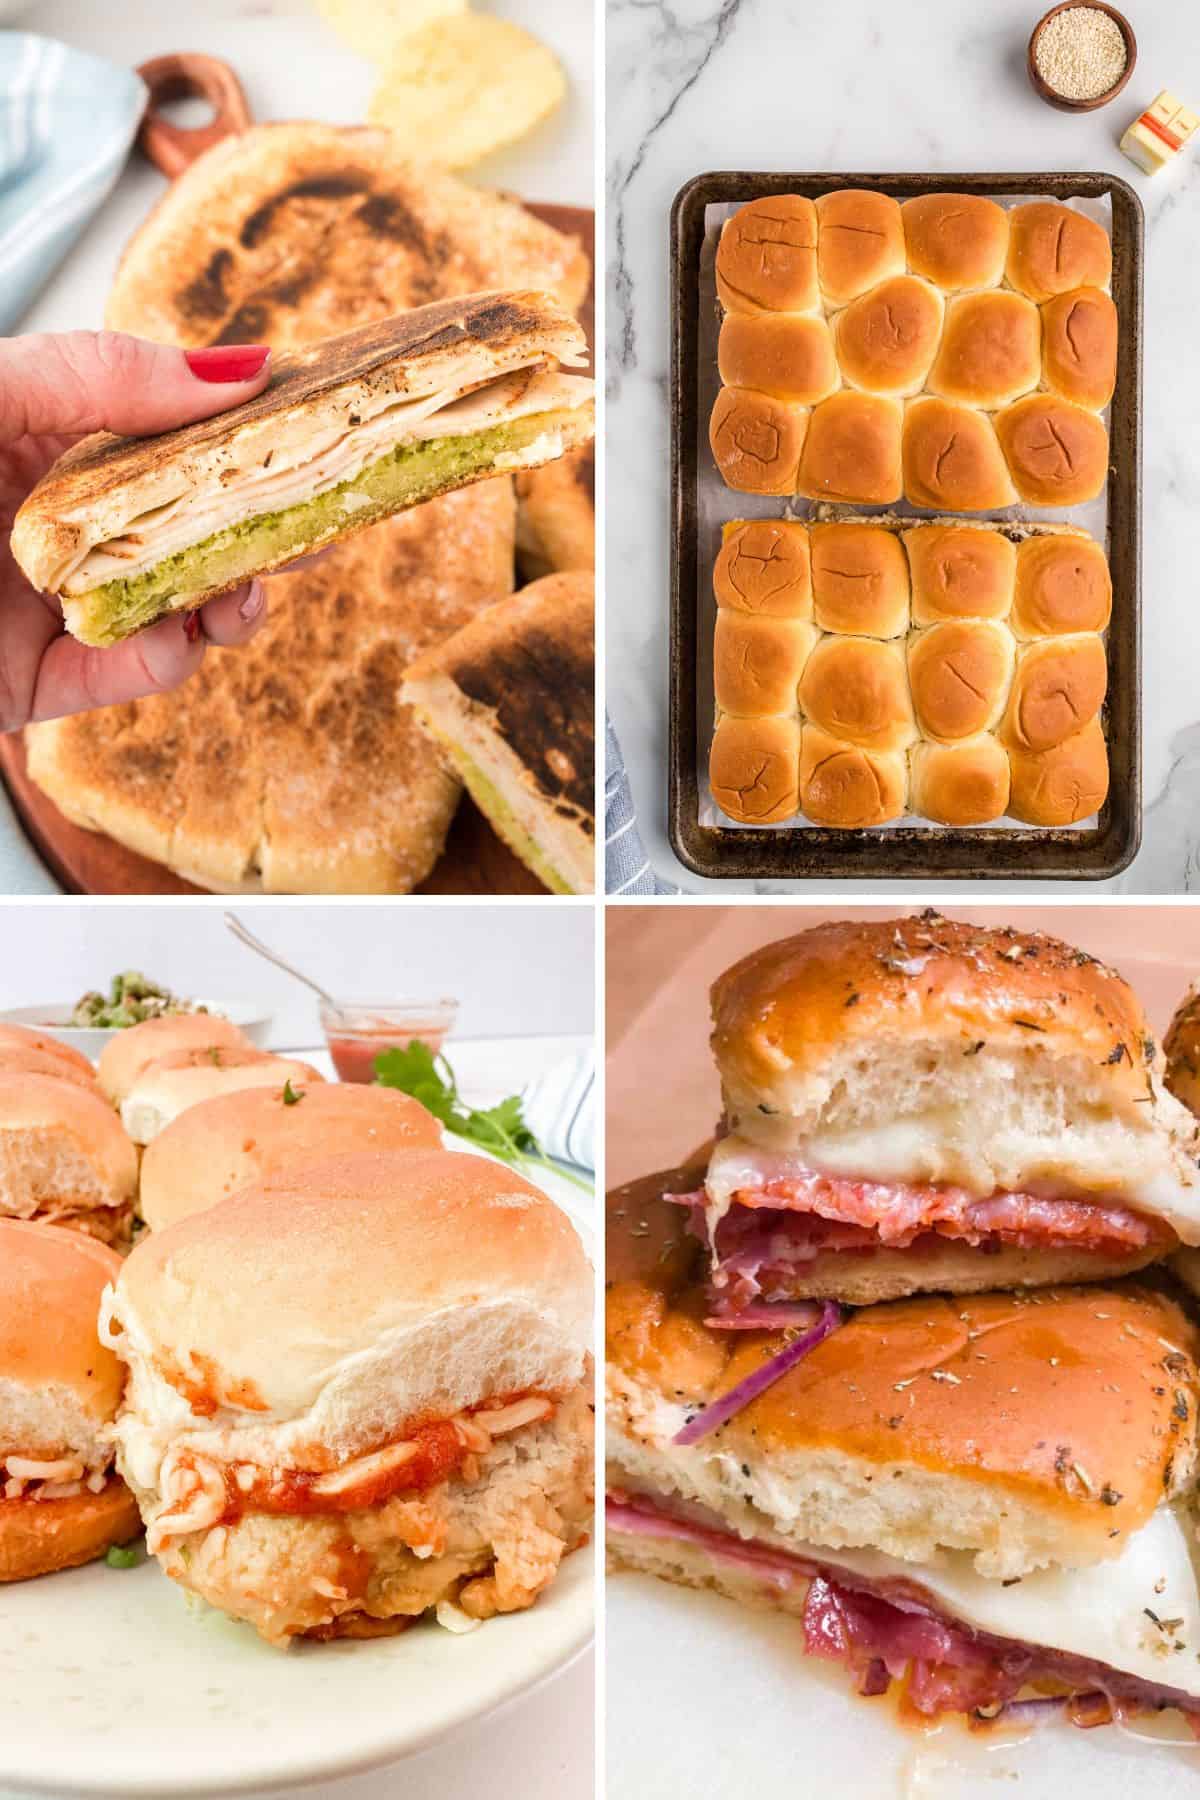 Slider sandwiches and panini to serve with pasta salad.